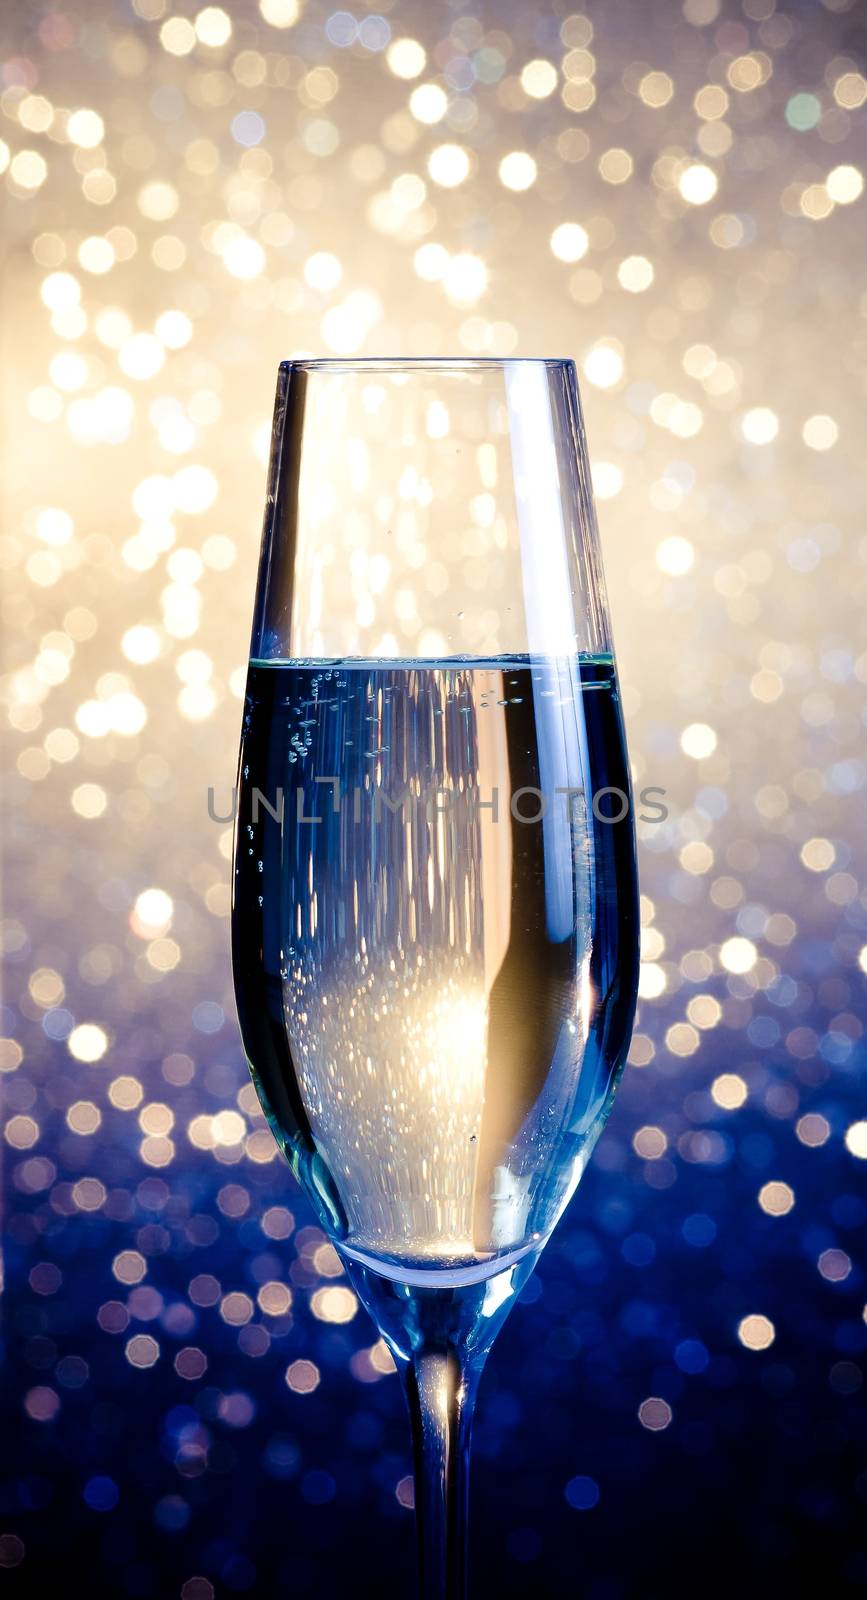 one flute of champagne on abstract background by donfiore